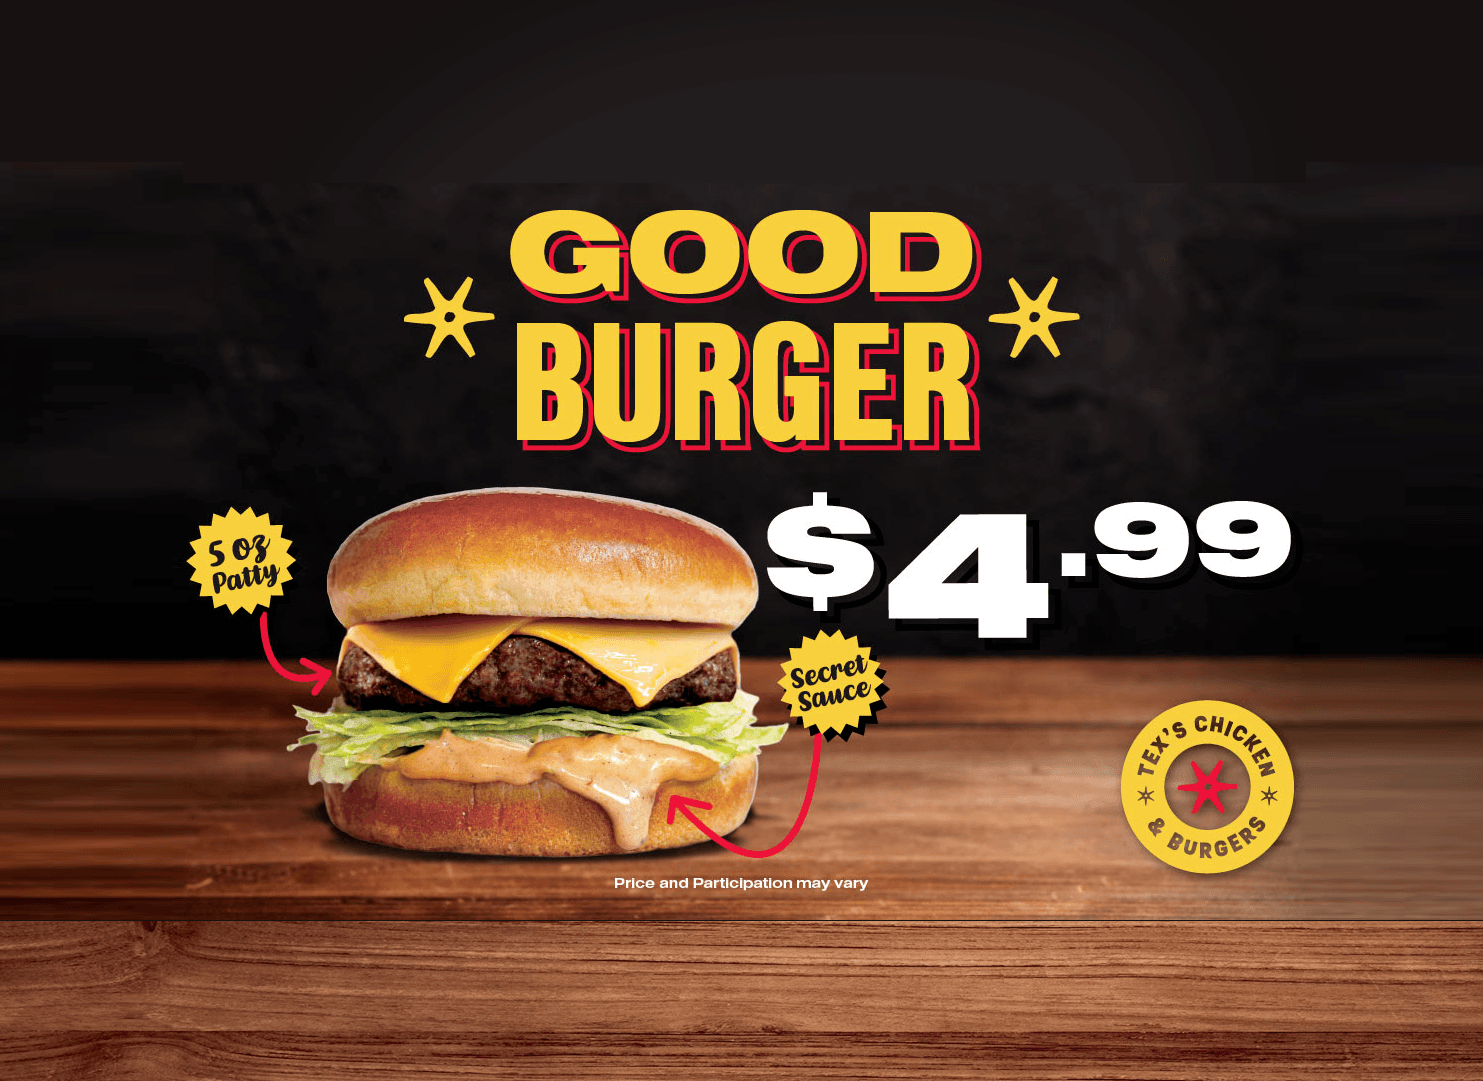 Introducing Tex's Chicken and Burgers' Newest Sensation: The Good Burger!